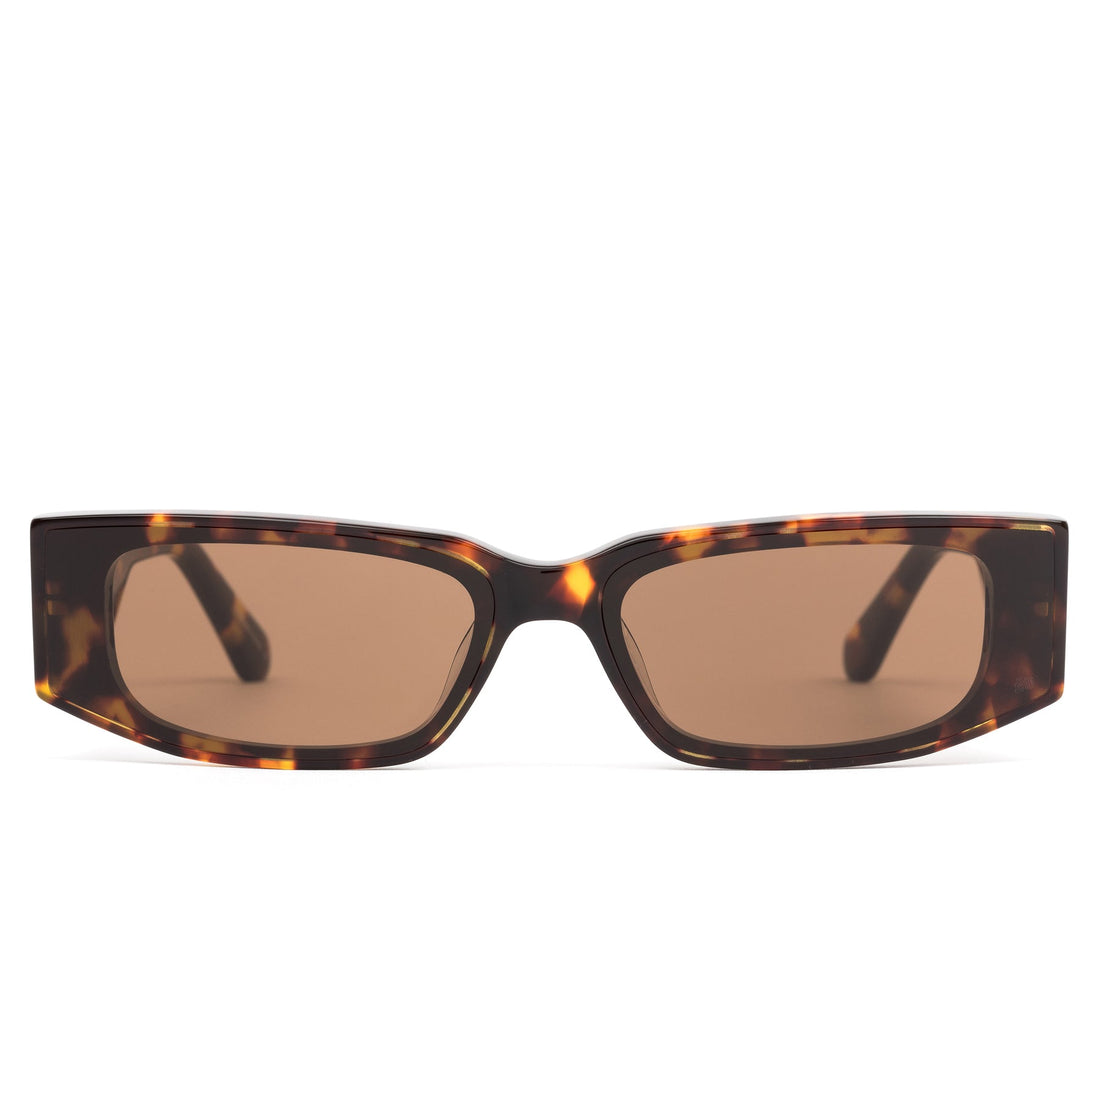 Sito - Endless in Maple Brown. Lens in Brown